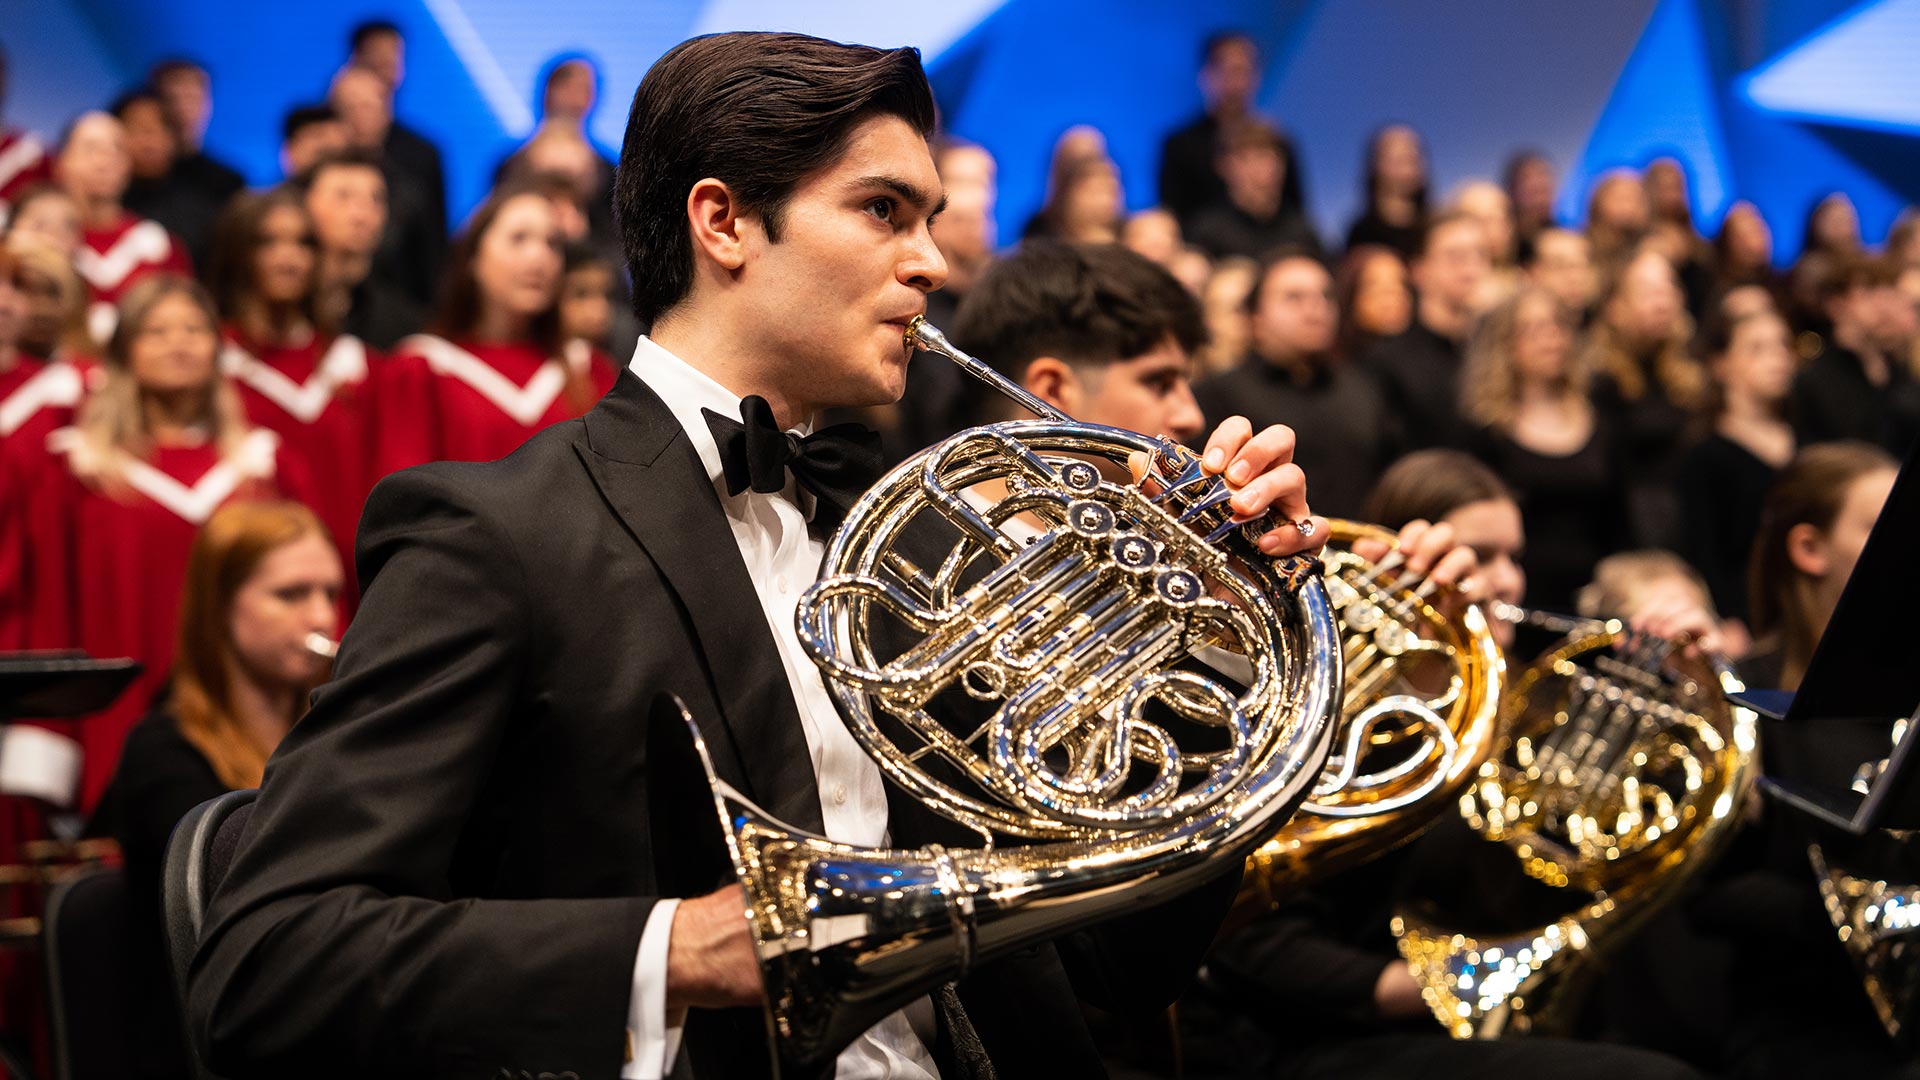 A student with a french horn performs at Orchestra Hall